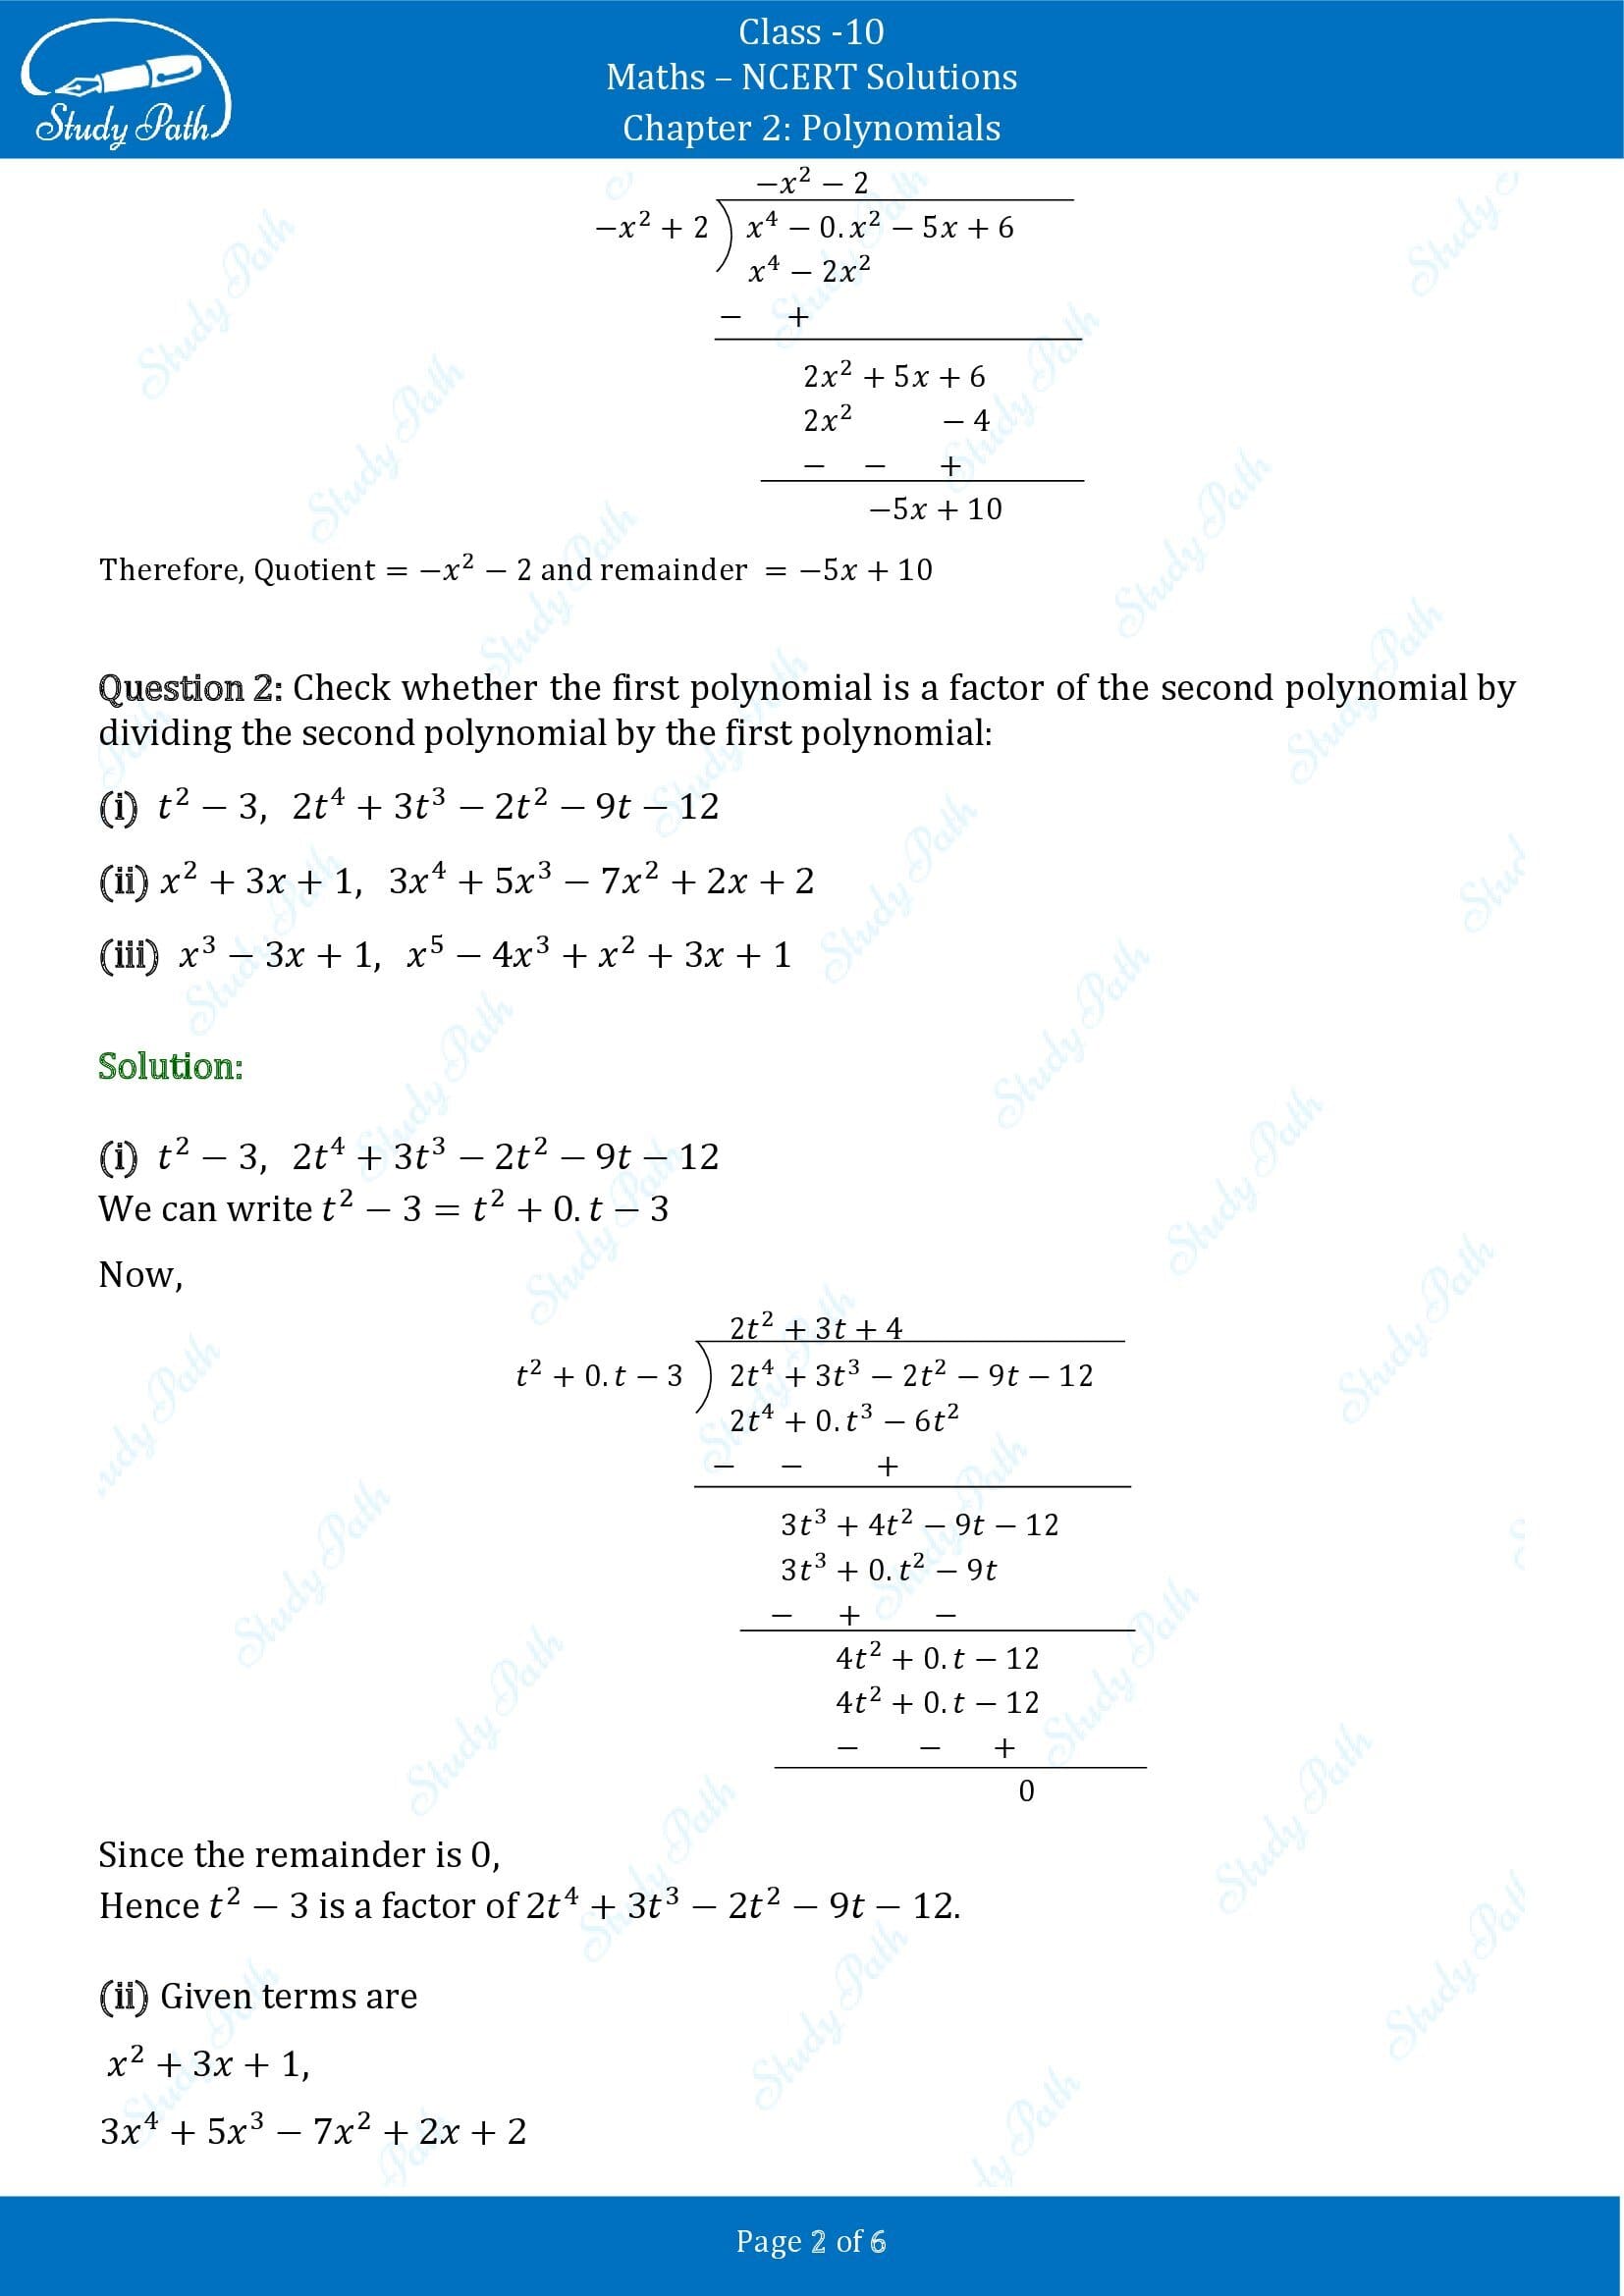 NCERT Solutions for Class 10 Maths Chapter 2 Polynomials Exercise 2.3 00002